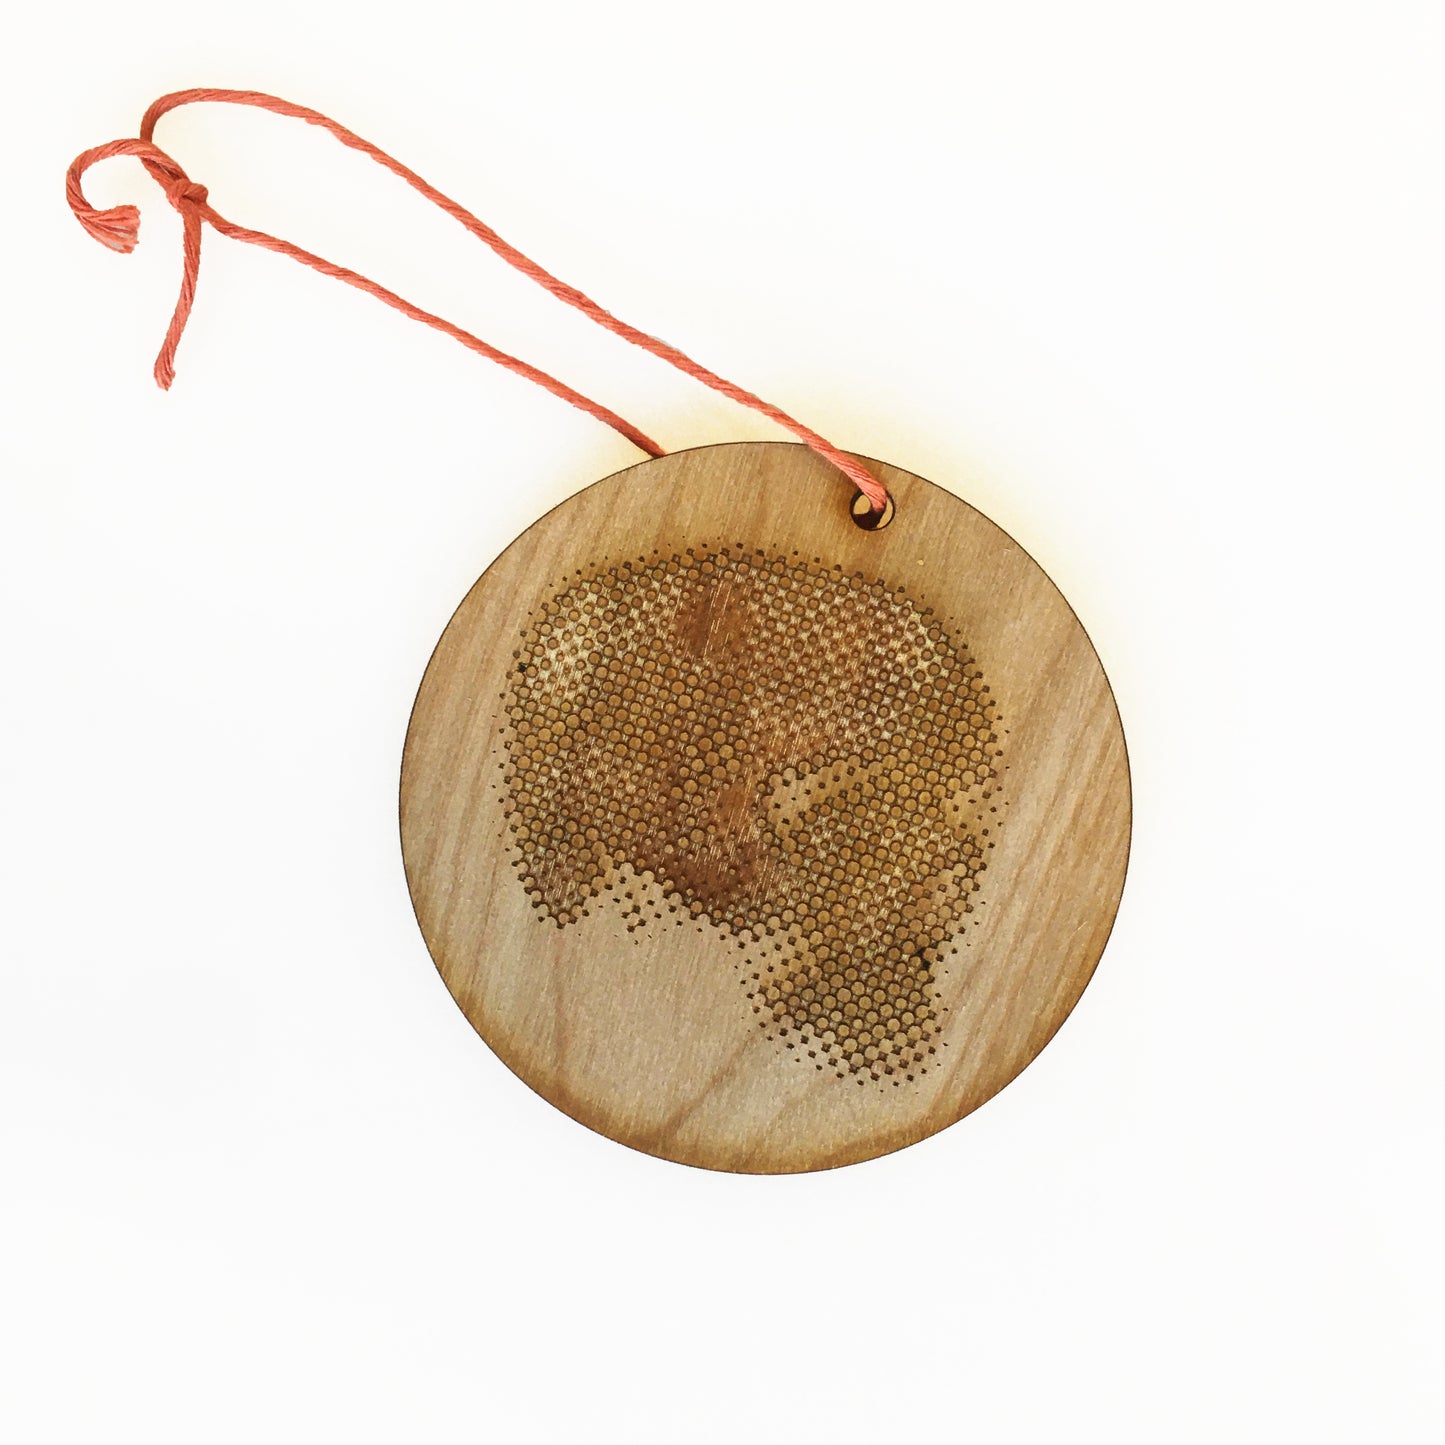 Square wooden skull hanging tag